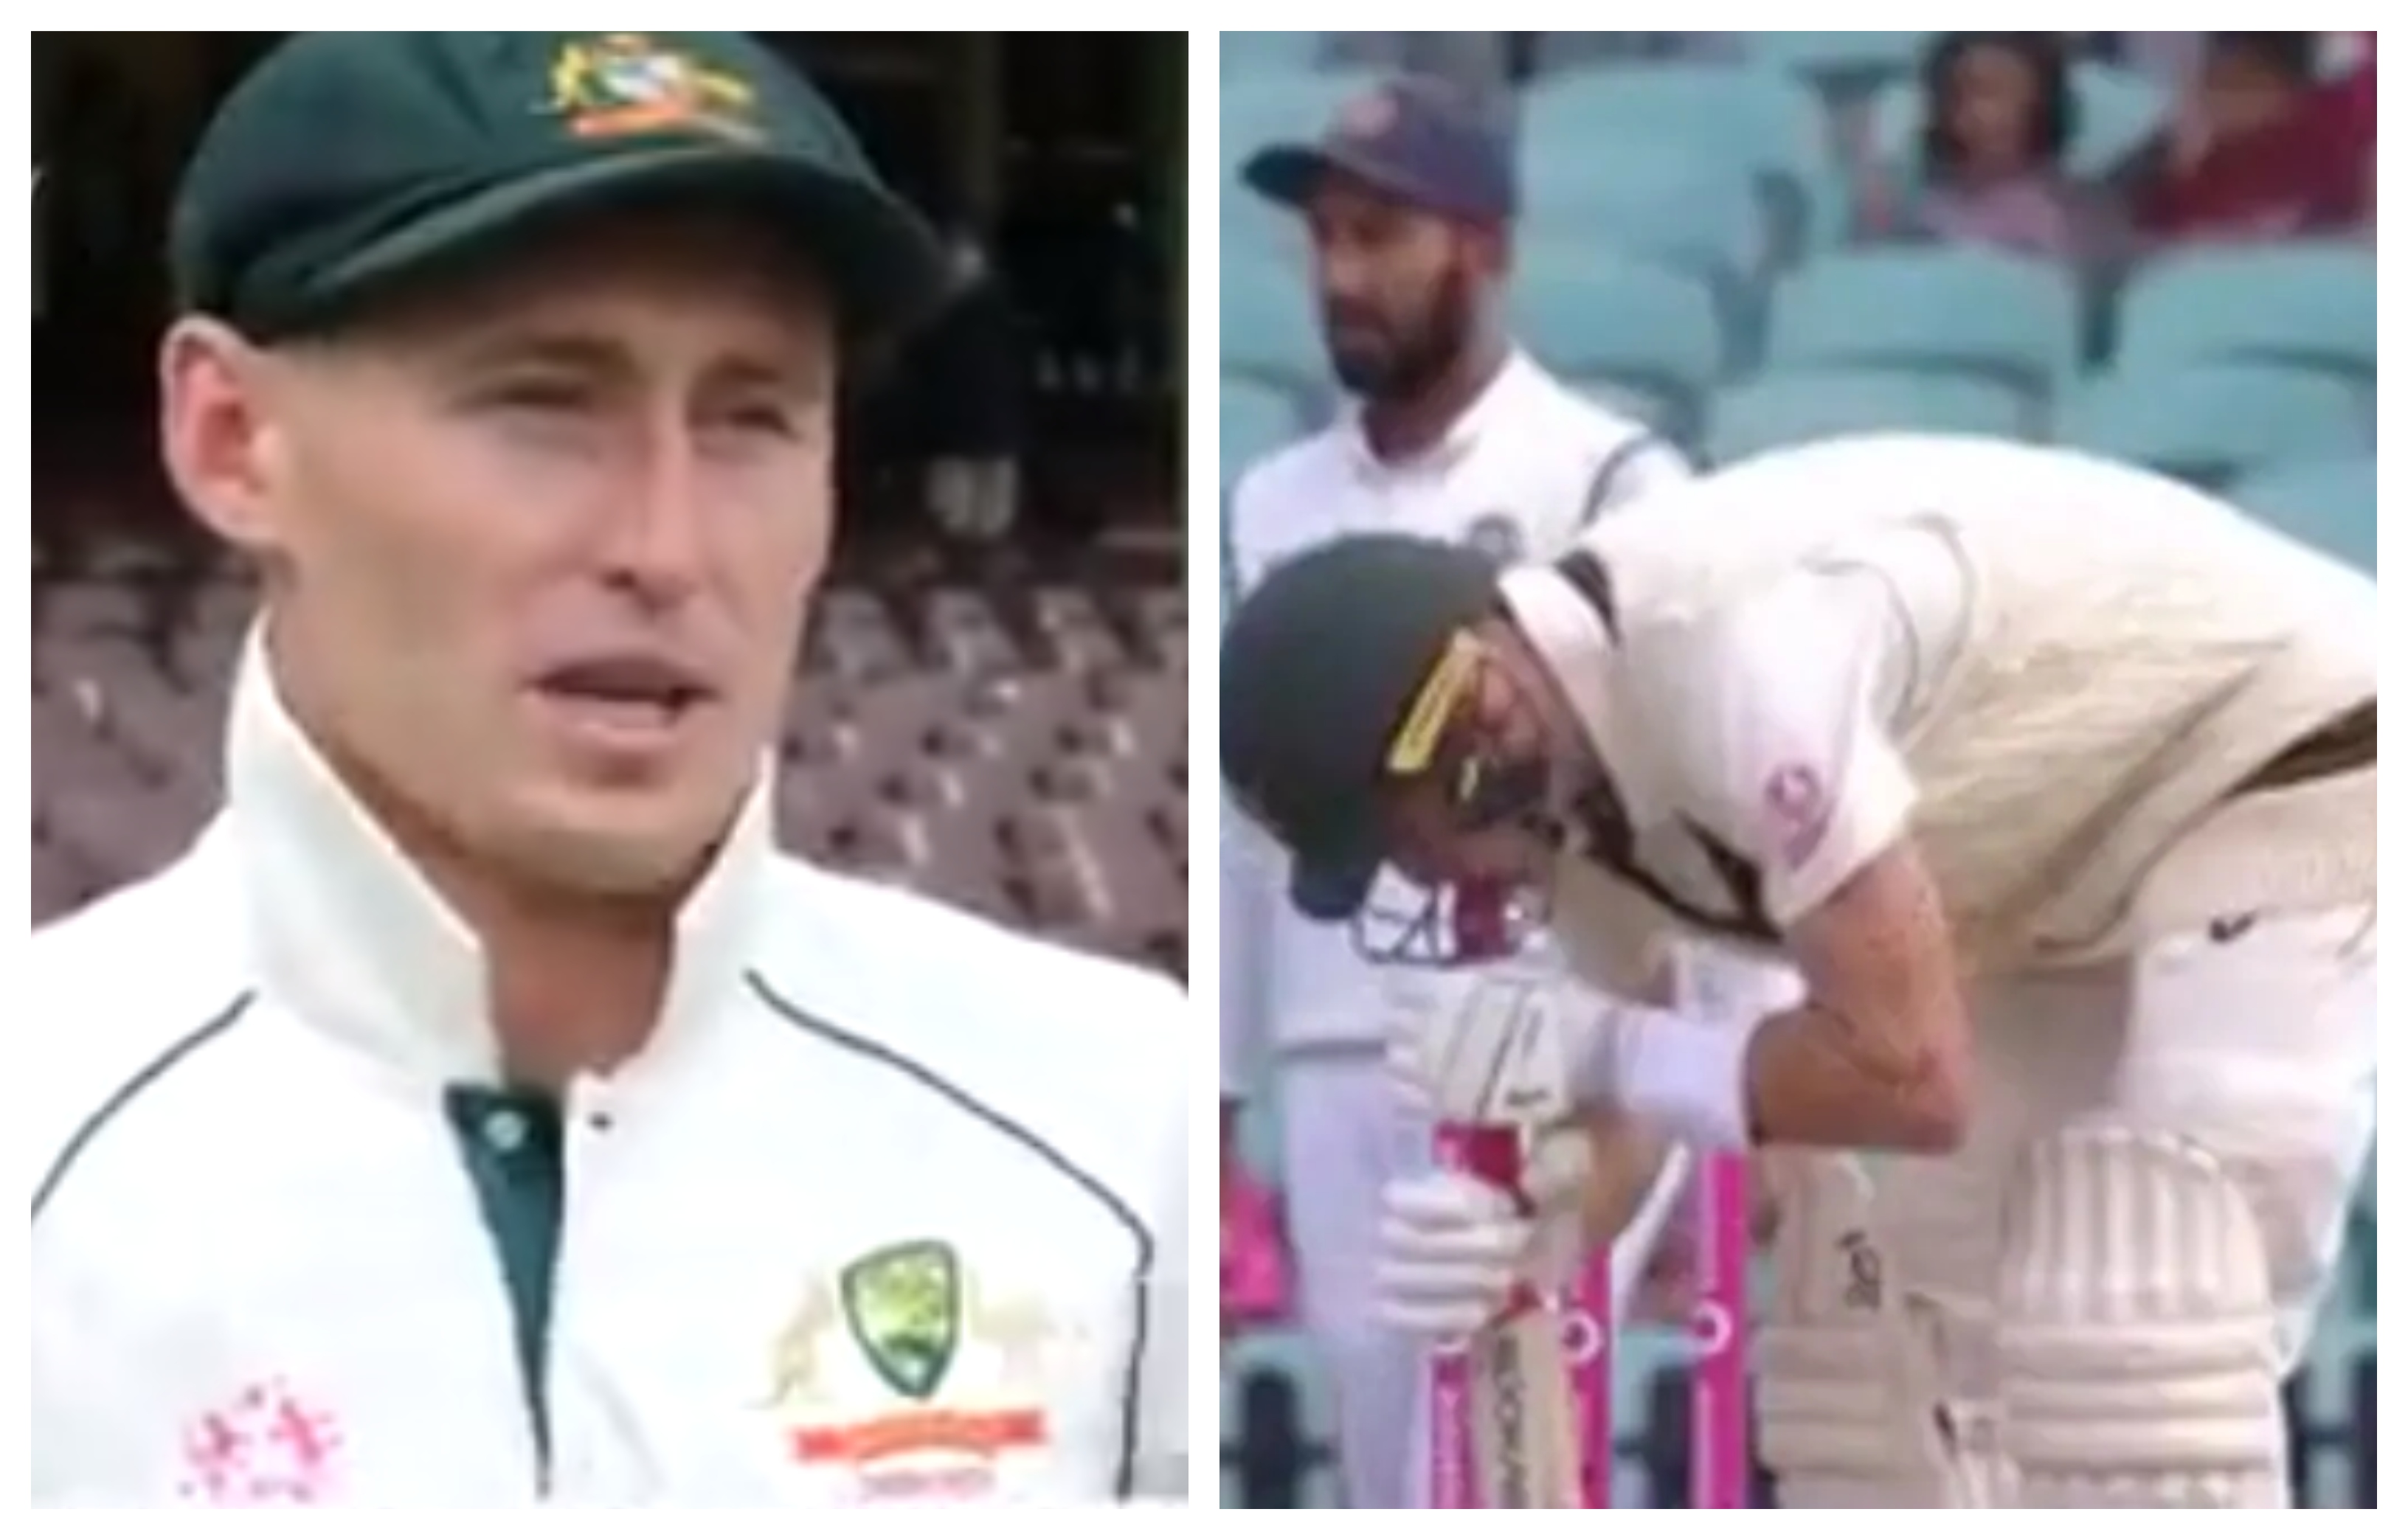 Labuschagne explained his unusual method for changing bat grip | Screengrab